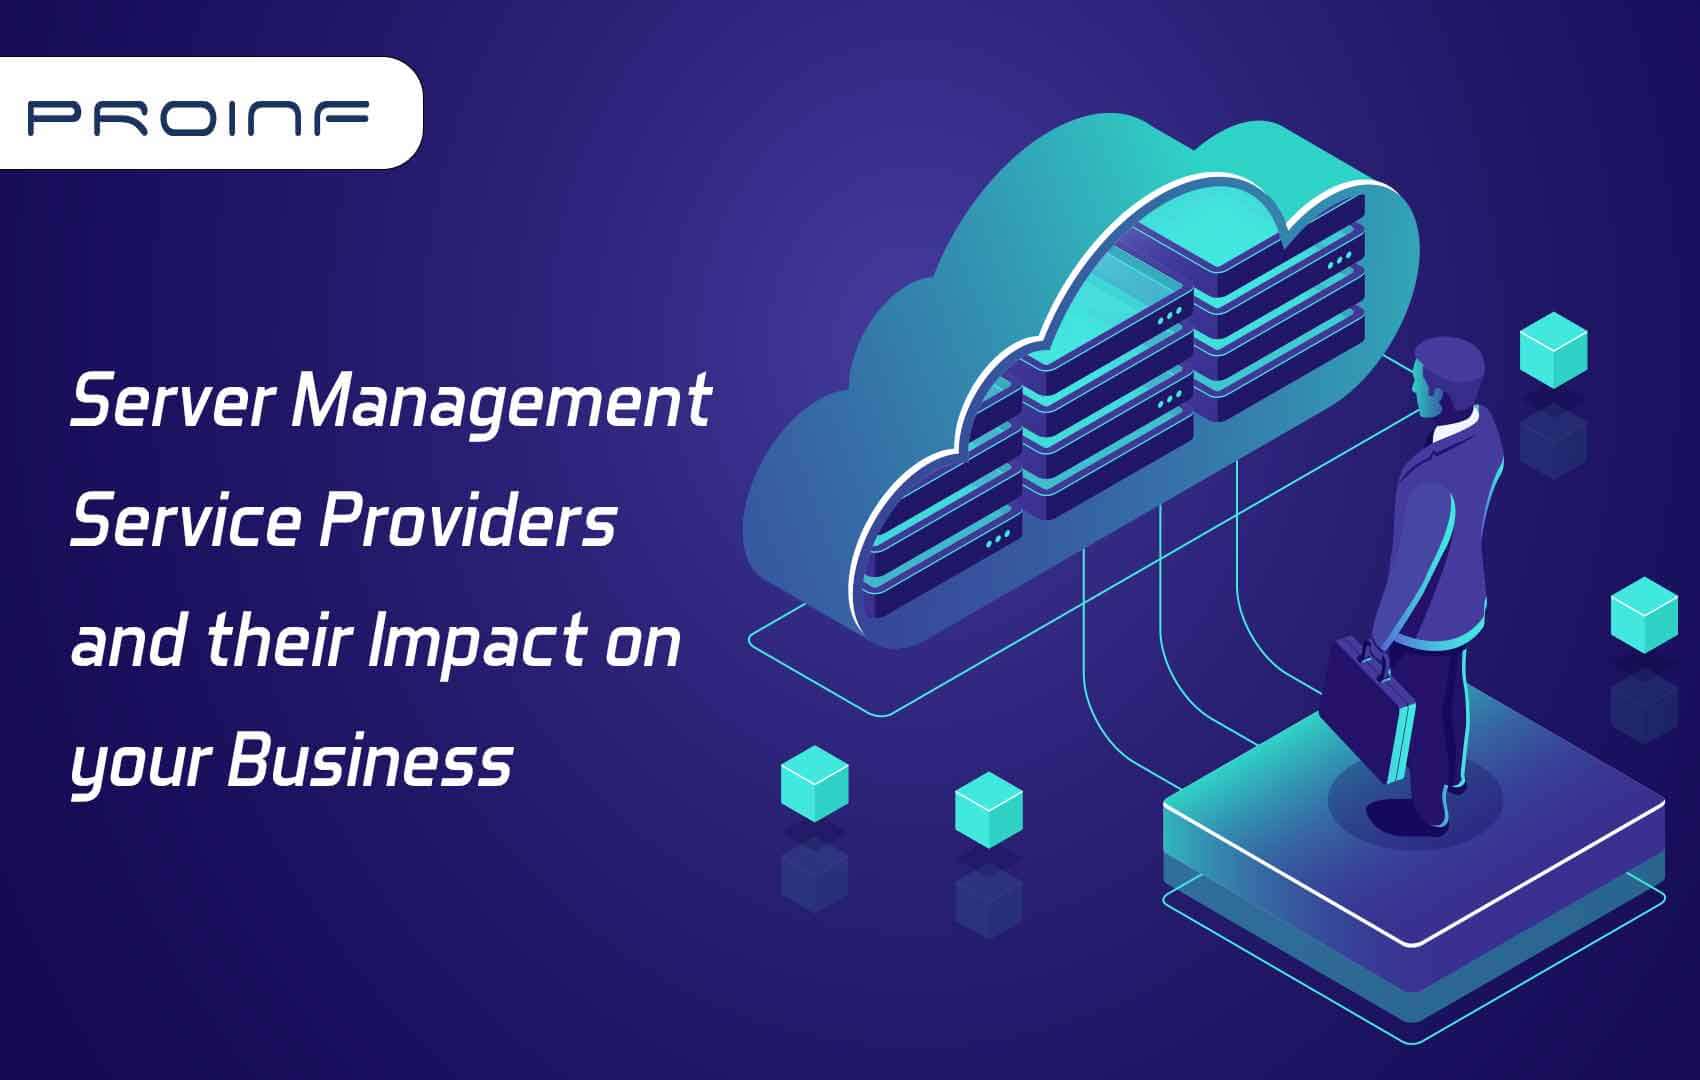 Server Management Service Providers and their Impact on your Business